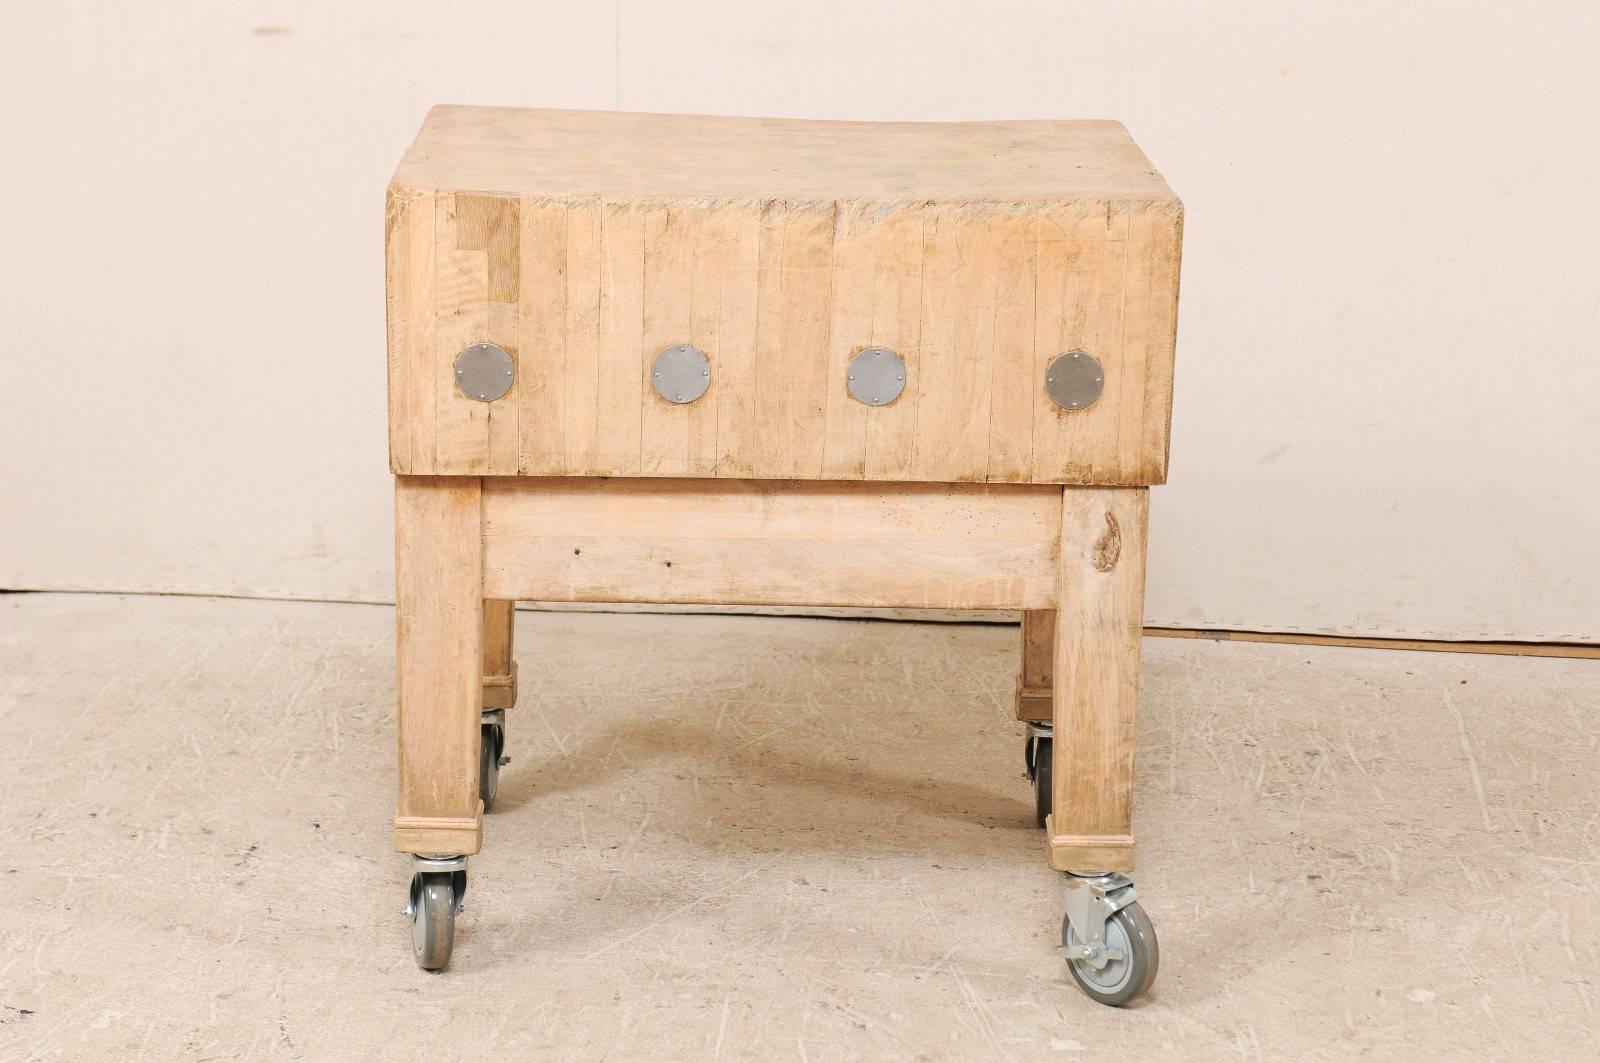 20th Century Swedish Vintage Butcher Block Bleached Wood Table with Squared Shape on Wheels